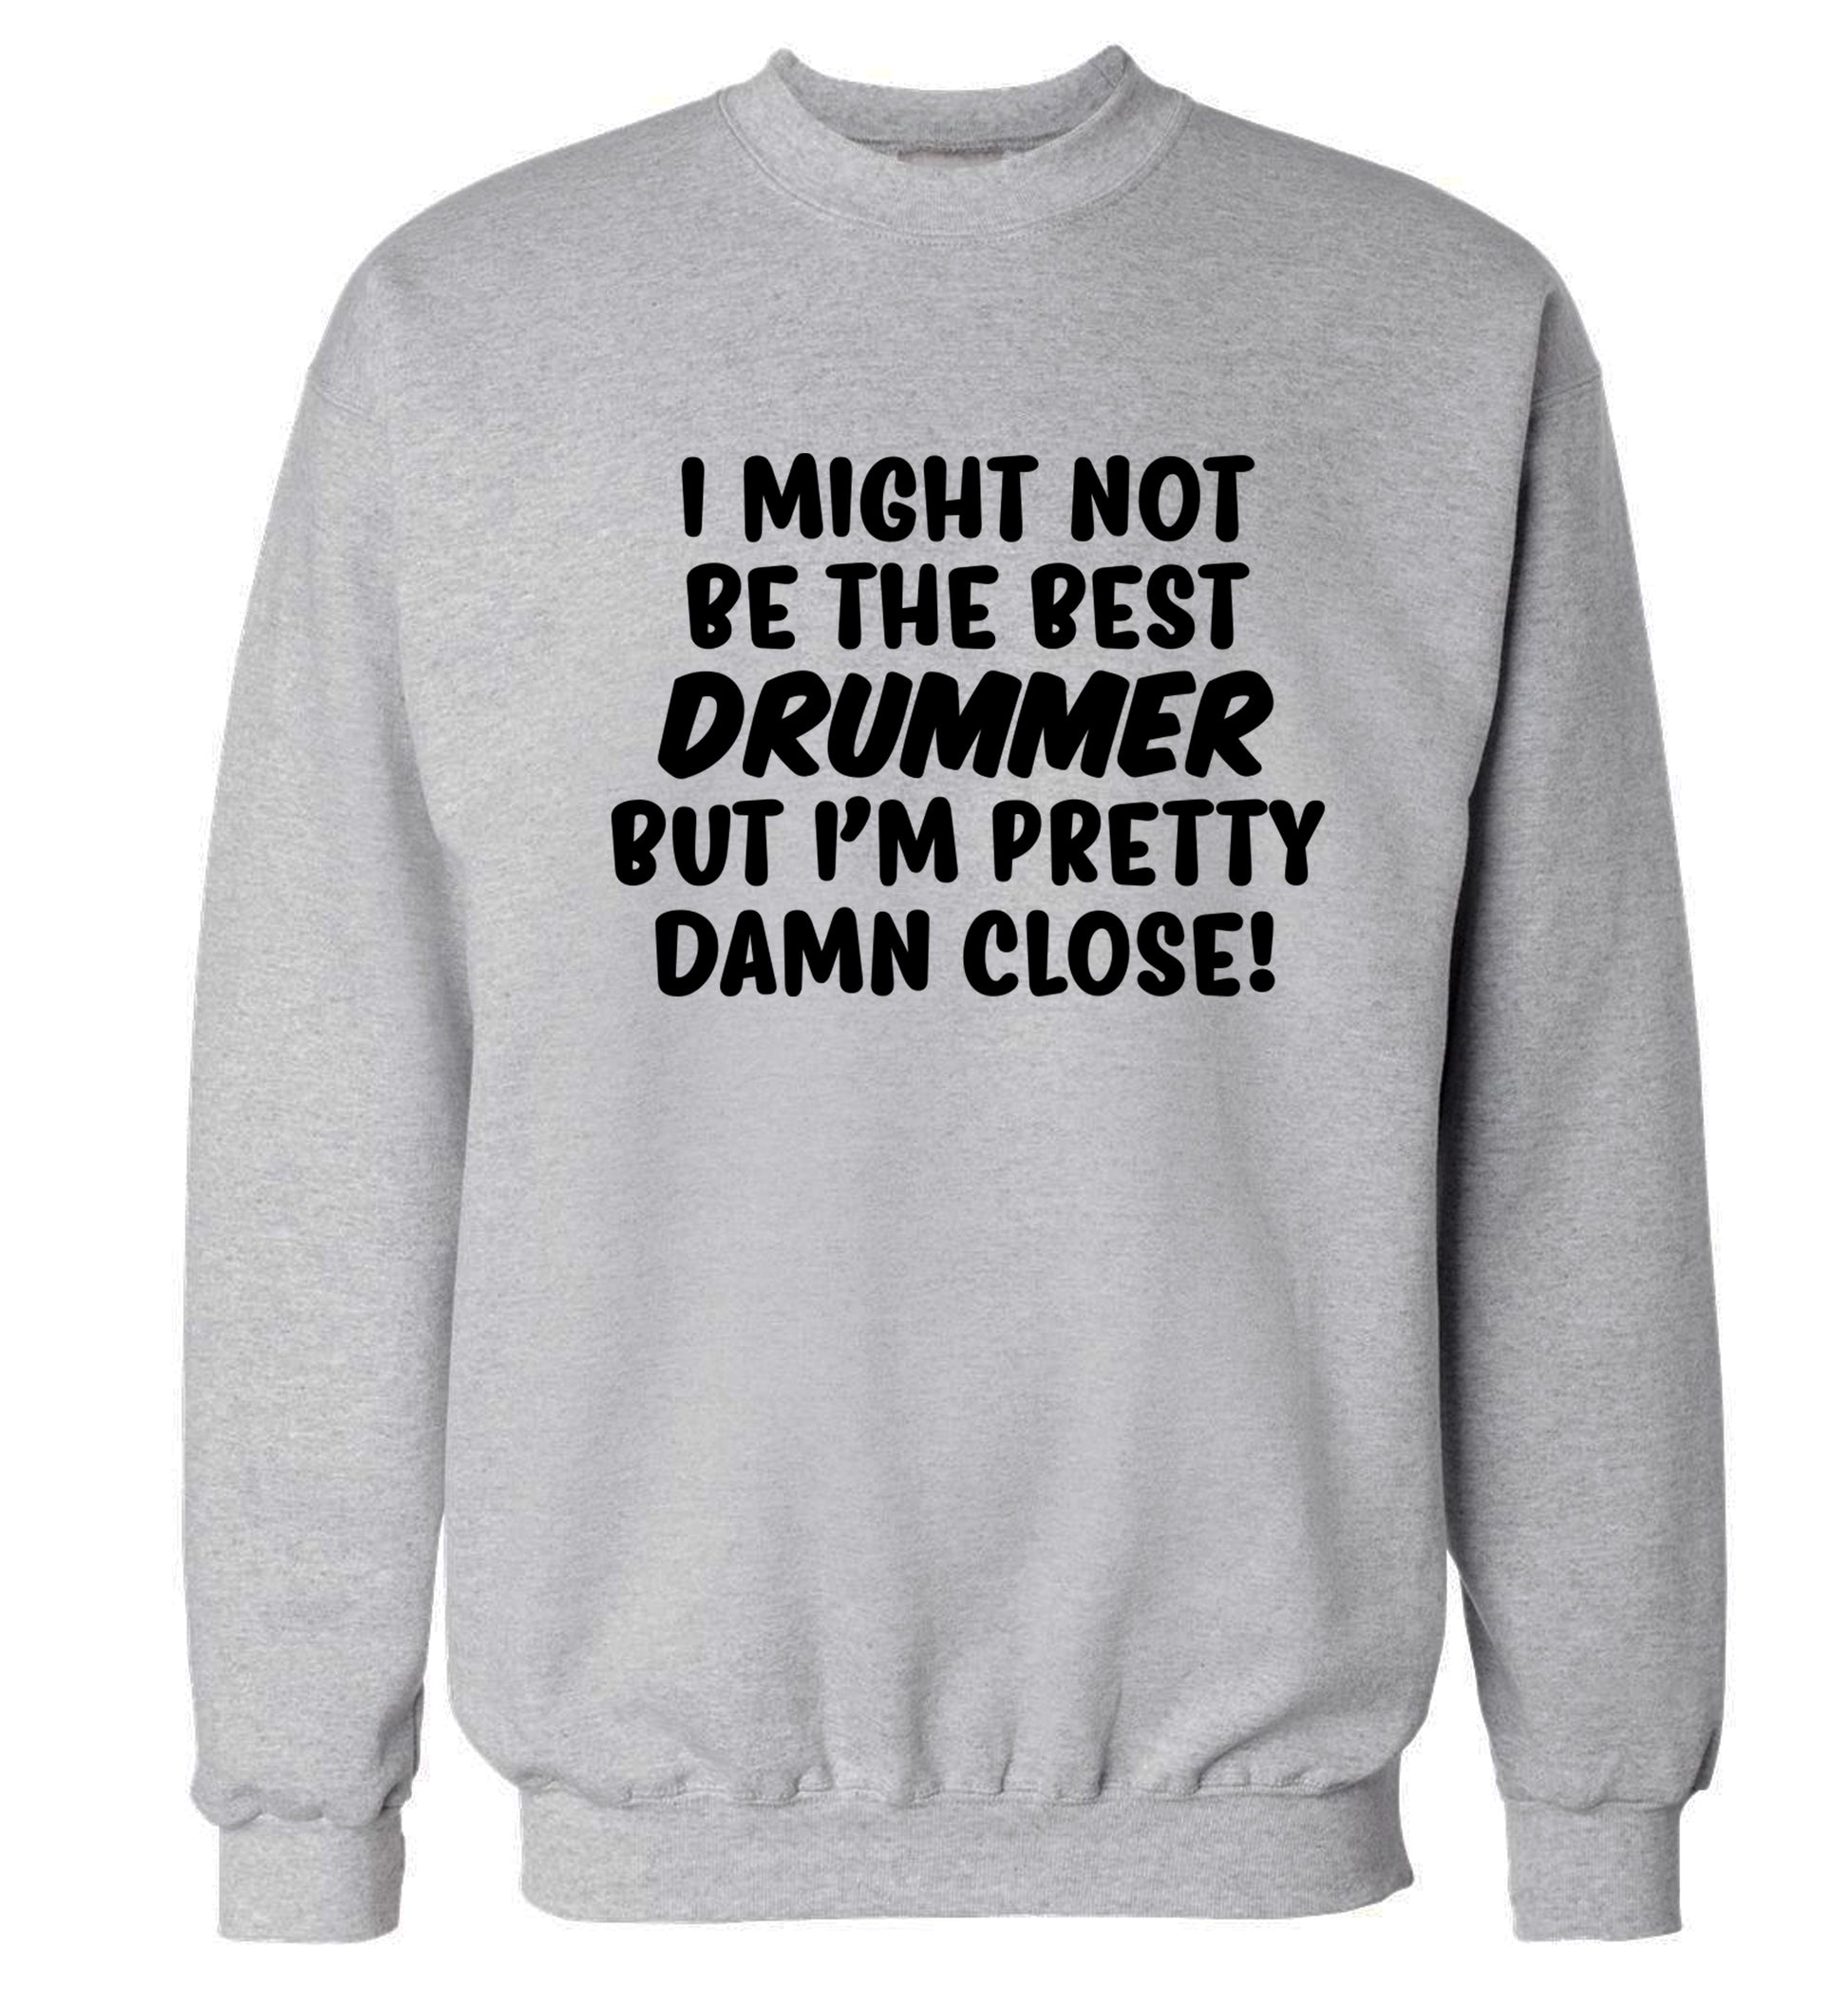 I might not be the best drummer but I'm pretty close! Adult's unisexgrey Sweater 2XL